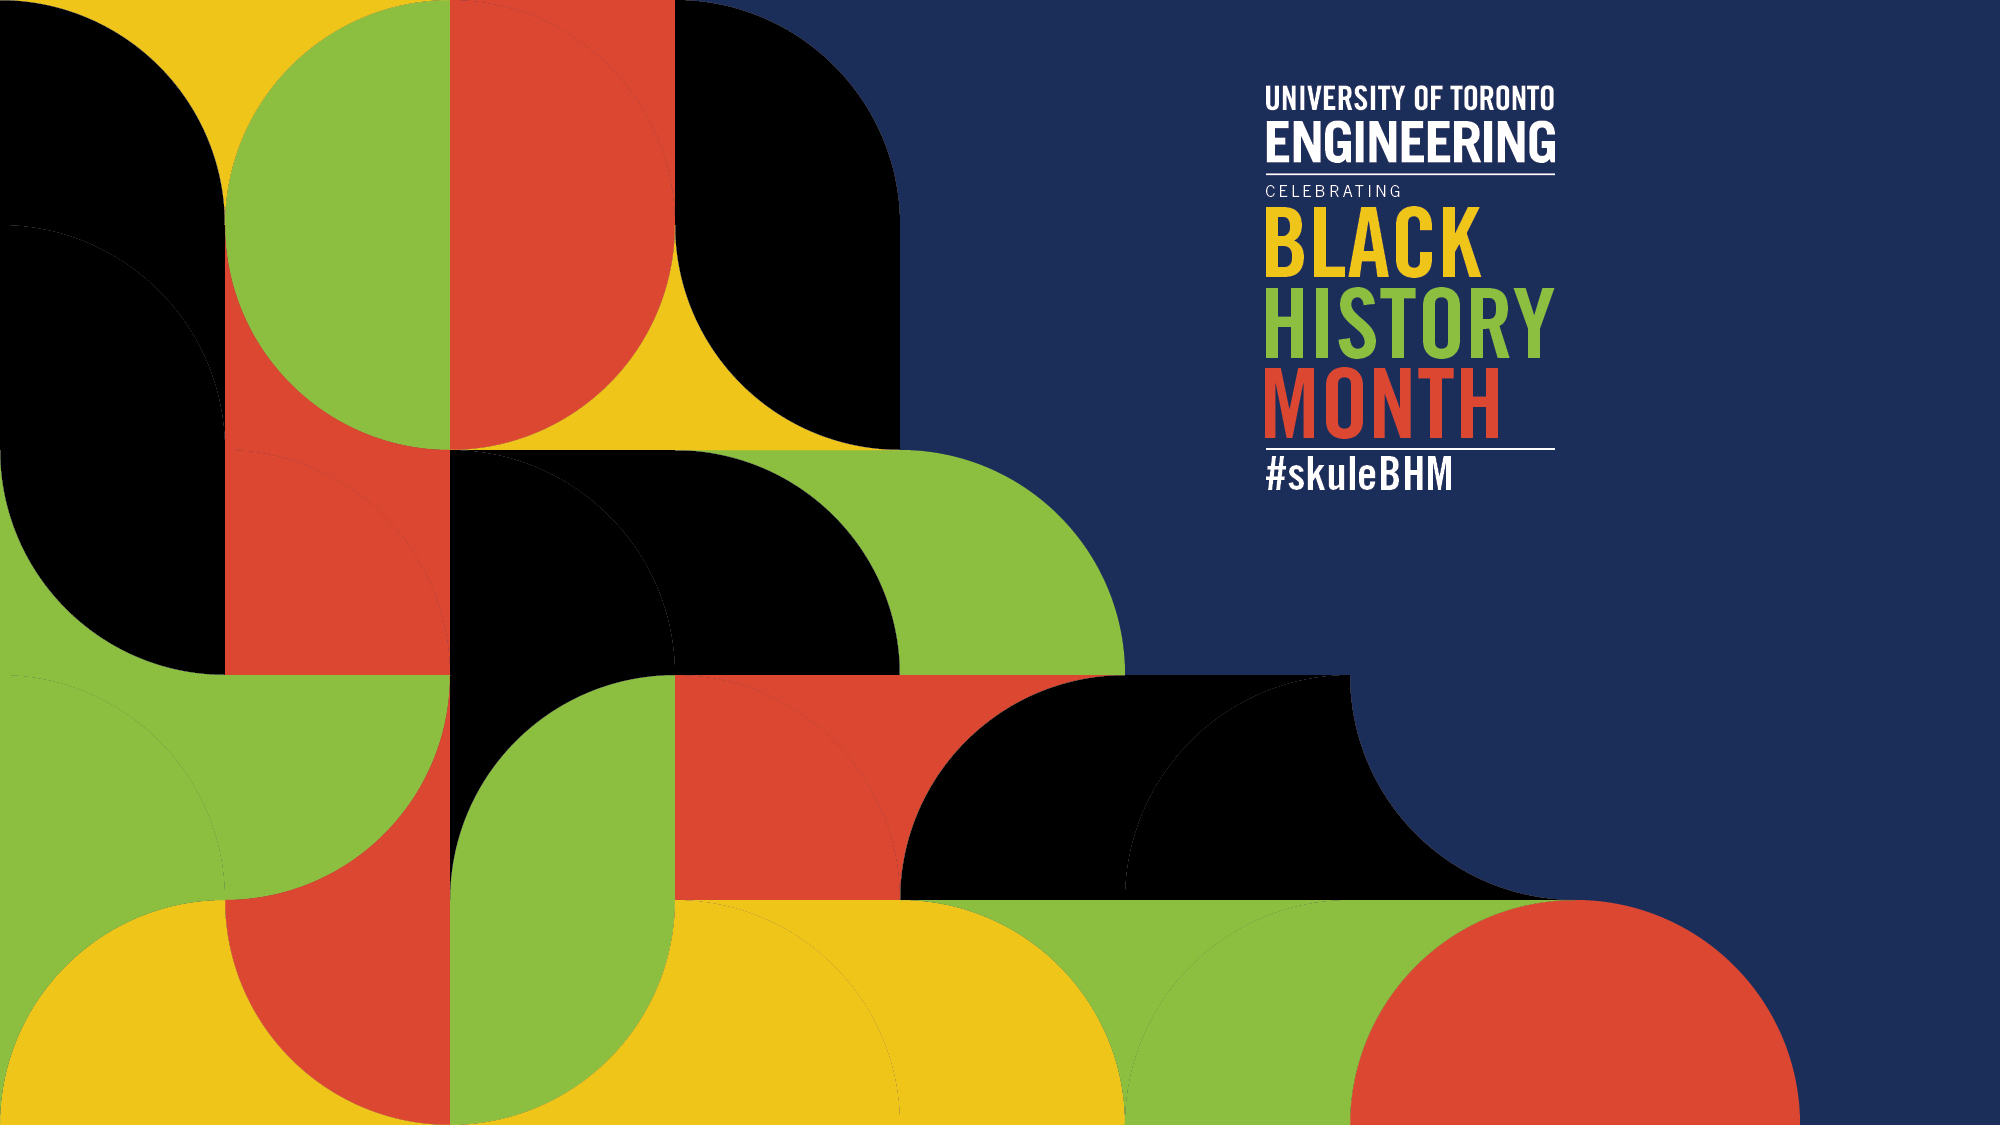 Mostly blue background with a yellow, green, and red design with text that reads: University of Toronto Engineering celebrating Black History Month #skuleBHM.